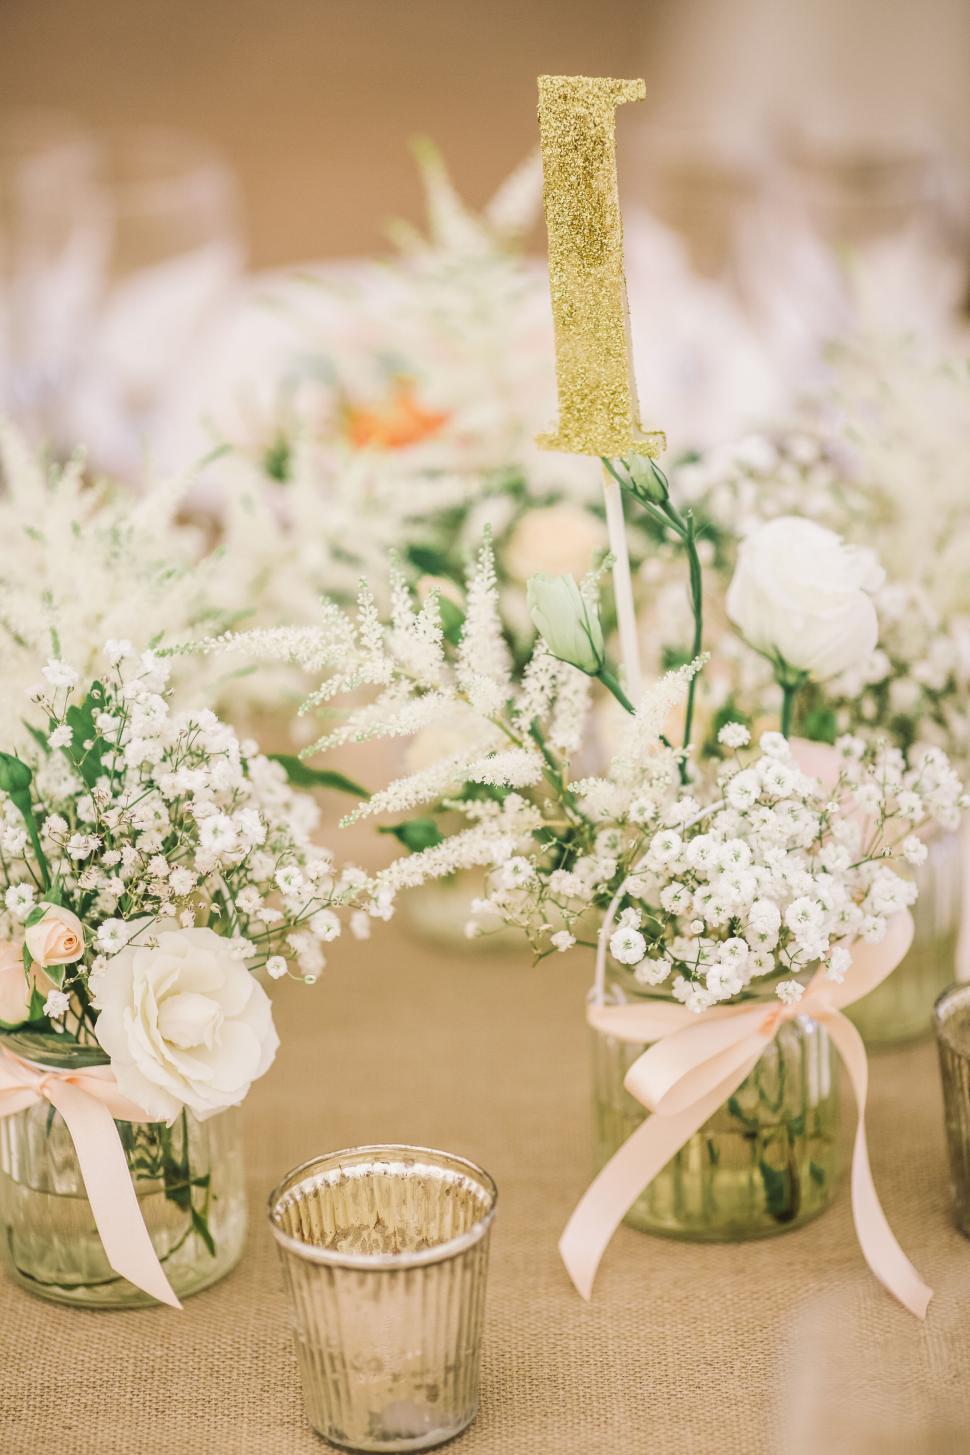 Free Image of Decorative table centerpiece with number 1 